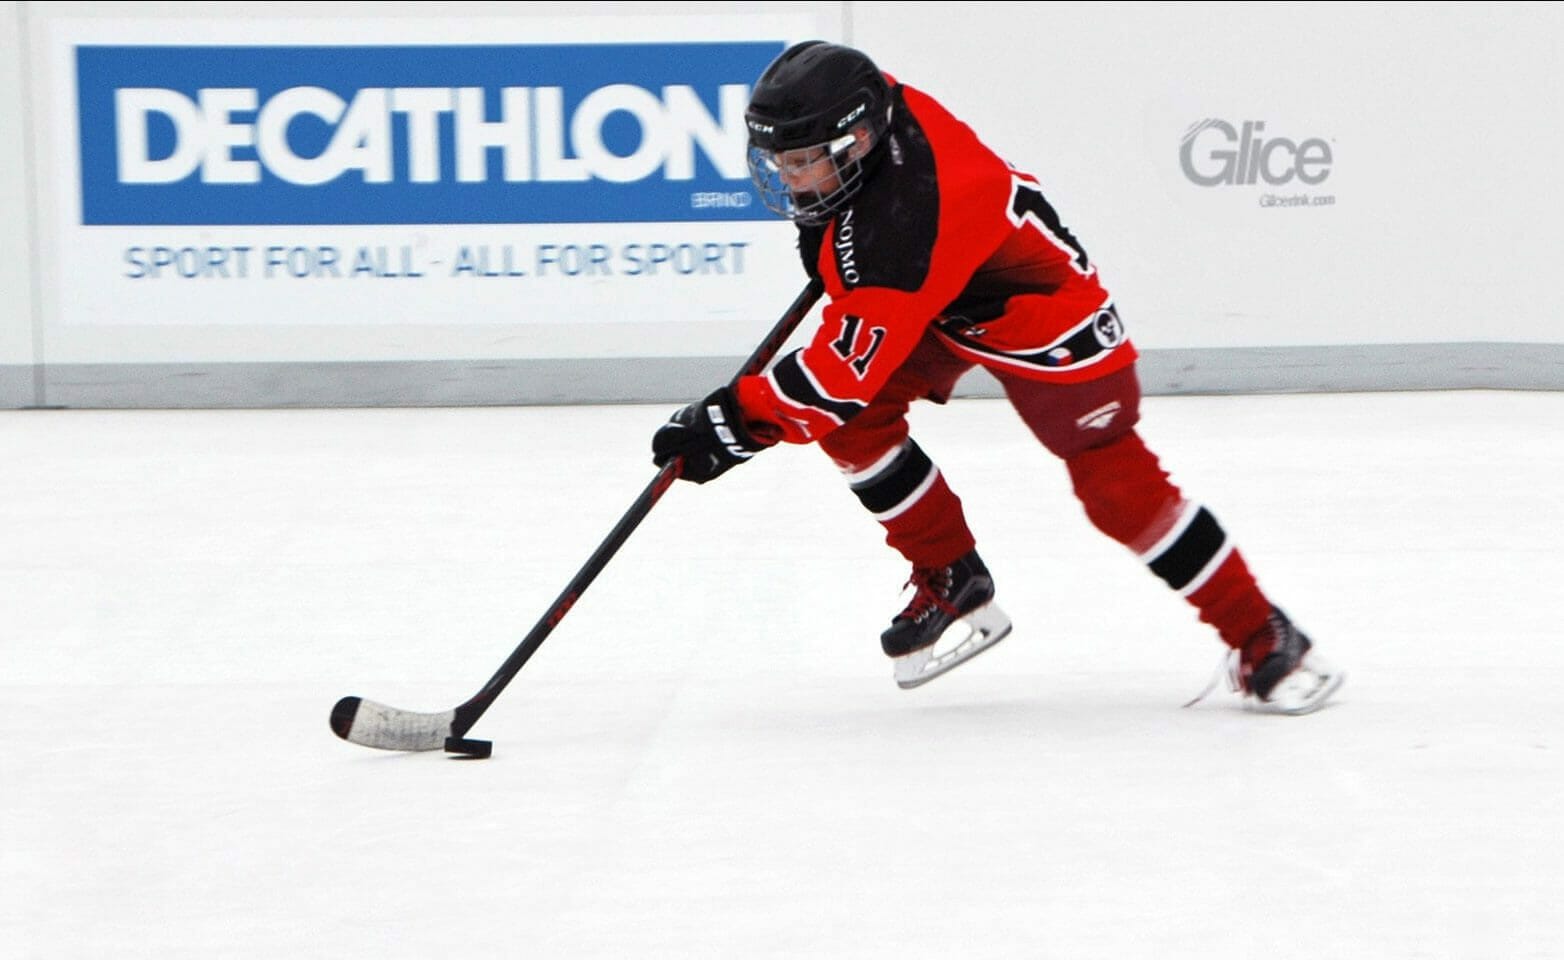 Ice hockey player gliding on artificial ice rink